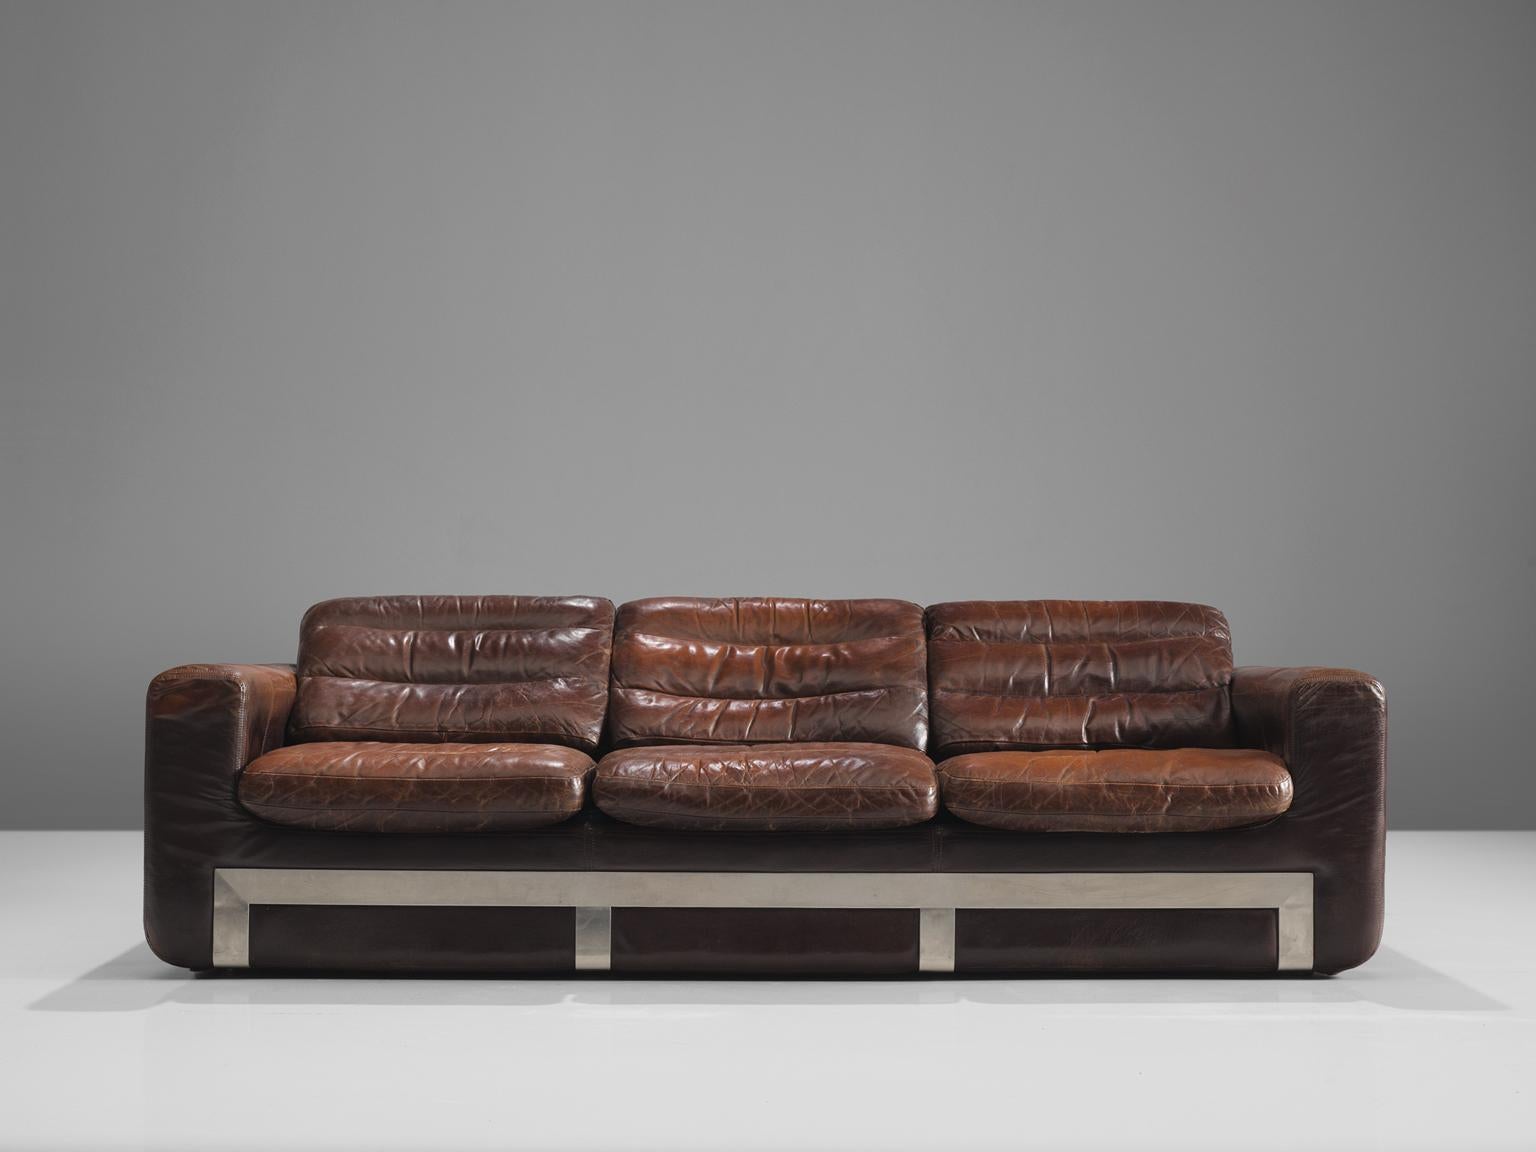 Roche Bobois, sofa, leather and steel, France, circa 1970. 

This comfortable sturdy leather and metal sofa is designed and made by Roche Bobois. As for much of Bobois' furniture it shows traits of the aesthetics by Airborne, Bauhaus and other